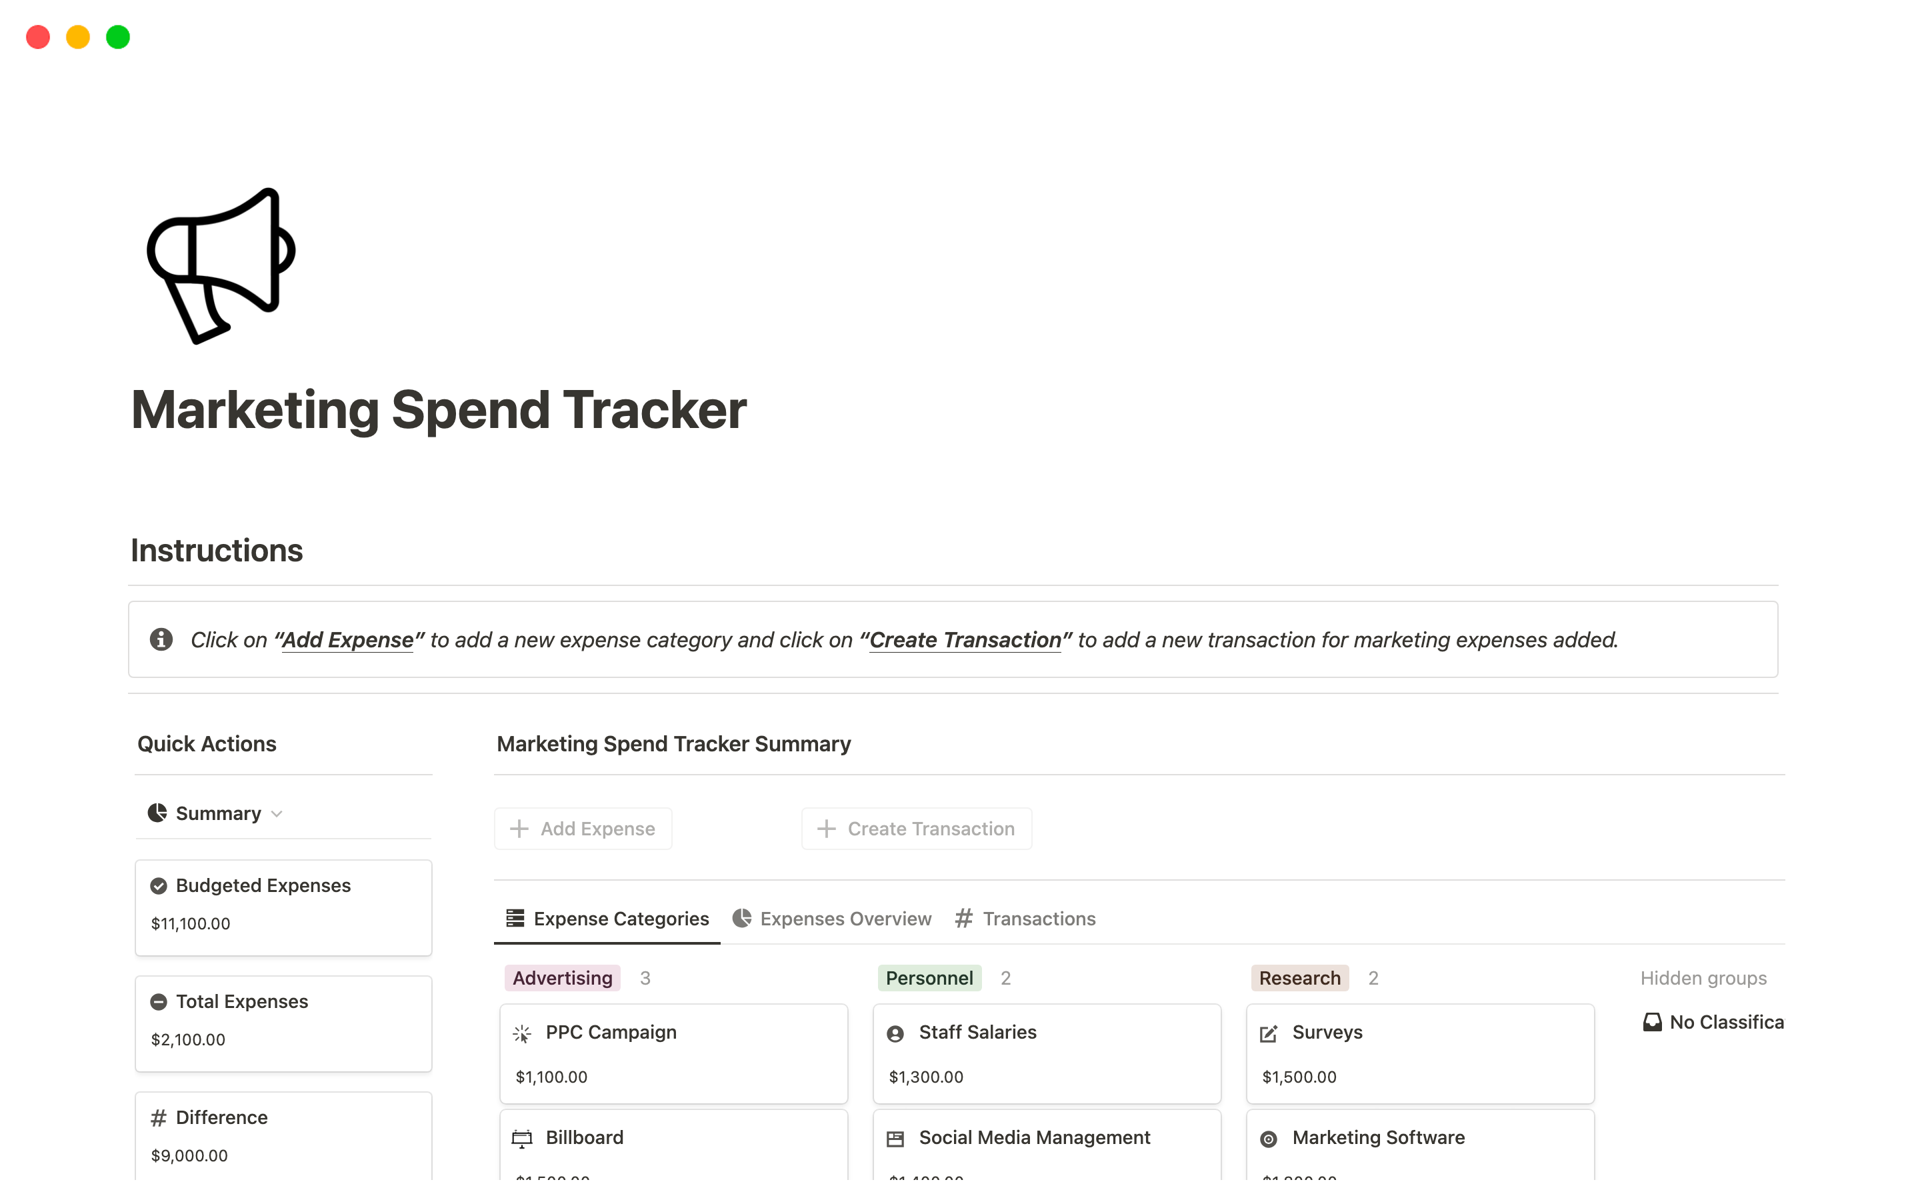 This template is suitable for recording and analyzing expenses related to marketing activities, making it easier for businesses to manage their marketing budgets.